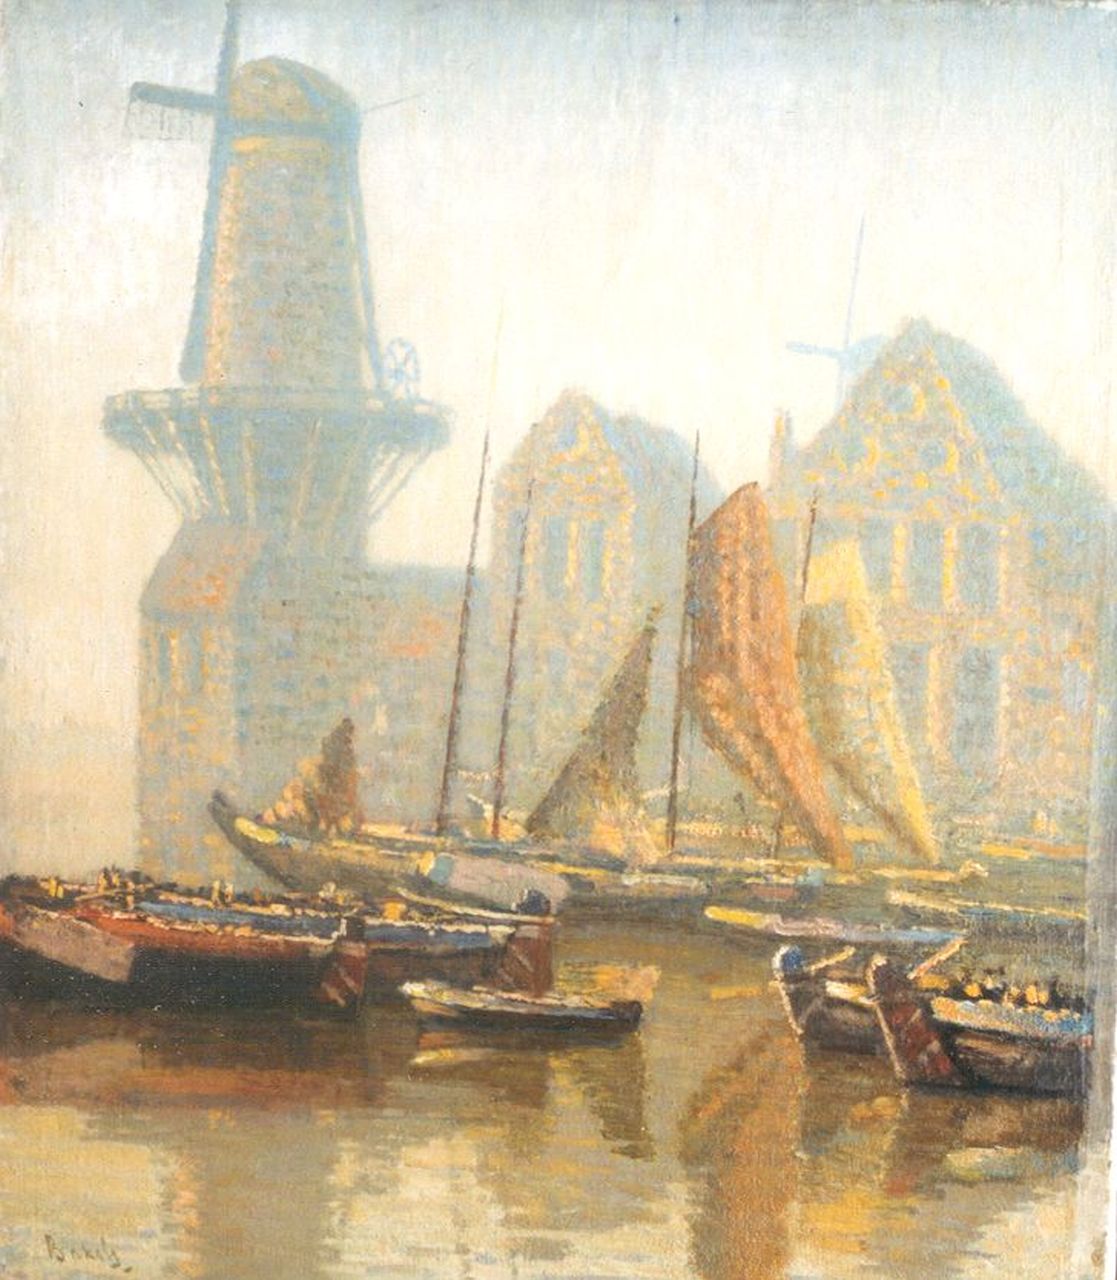 Bakels R.S.  | Reinier Sybrand Bakels, Fishing-boats by a windmill, Delfshaven, Öl auf Leinwand 64,0 x 55,1 cm, signed l.l.